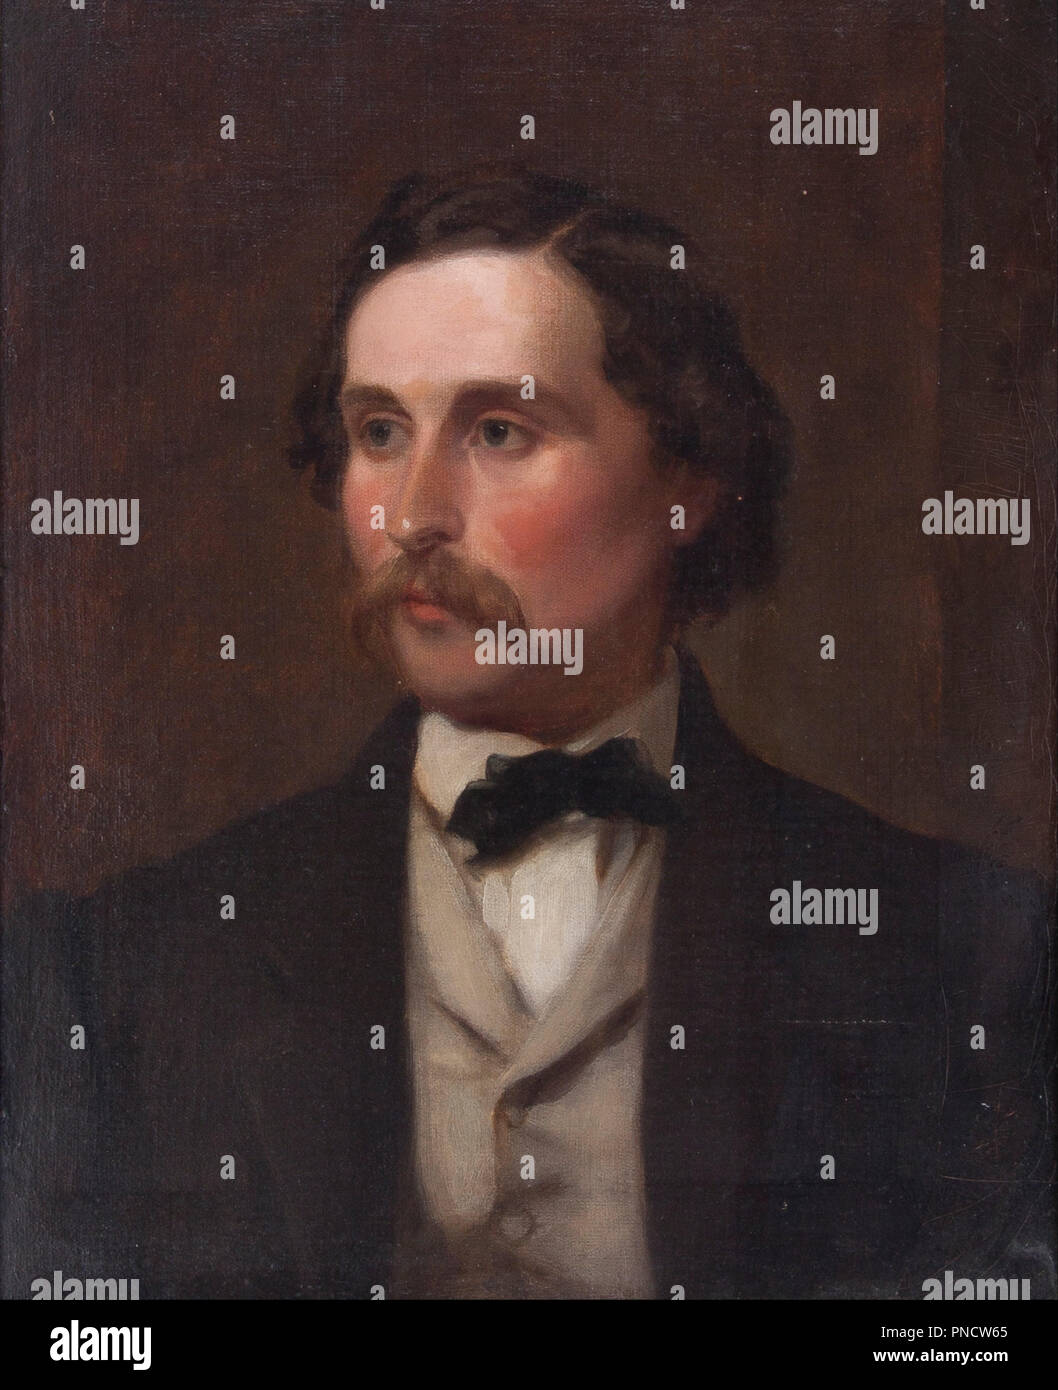 Nathan Flint Baker (1820-1891). Date/Period: 1845. Painting. Oil on canvas. Height: 29.50 mm (1.16 in); Width: 29.50 mm (1.16 in). Author: Emanuel Leutze. Stock Photo